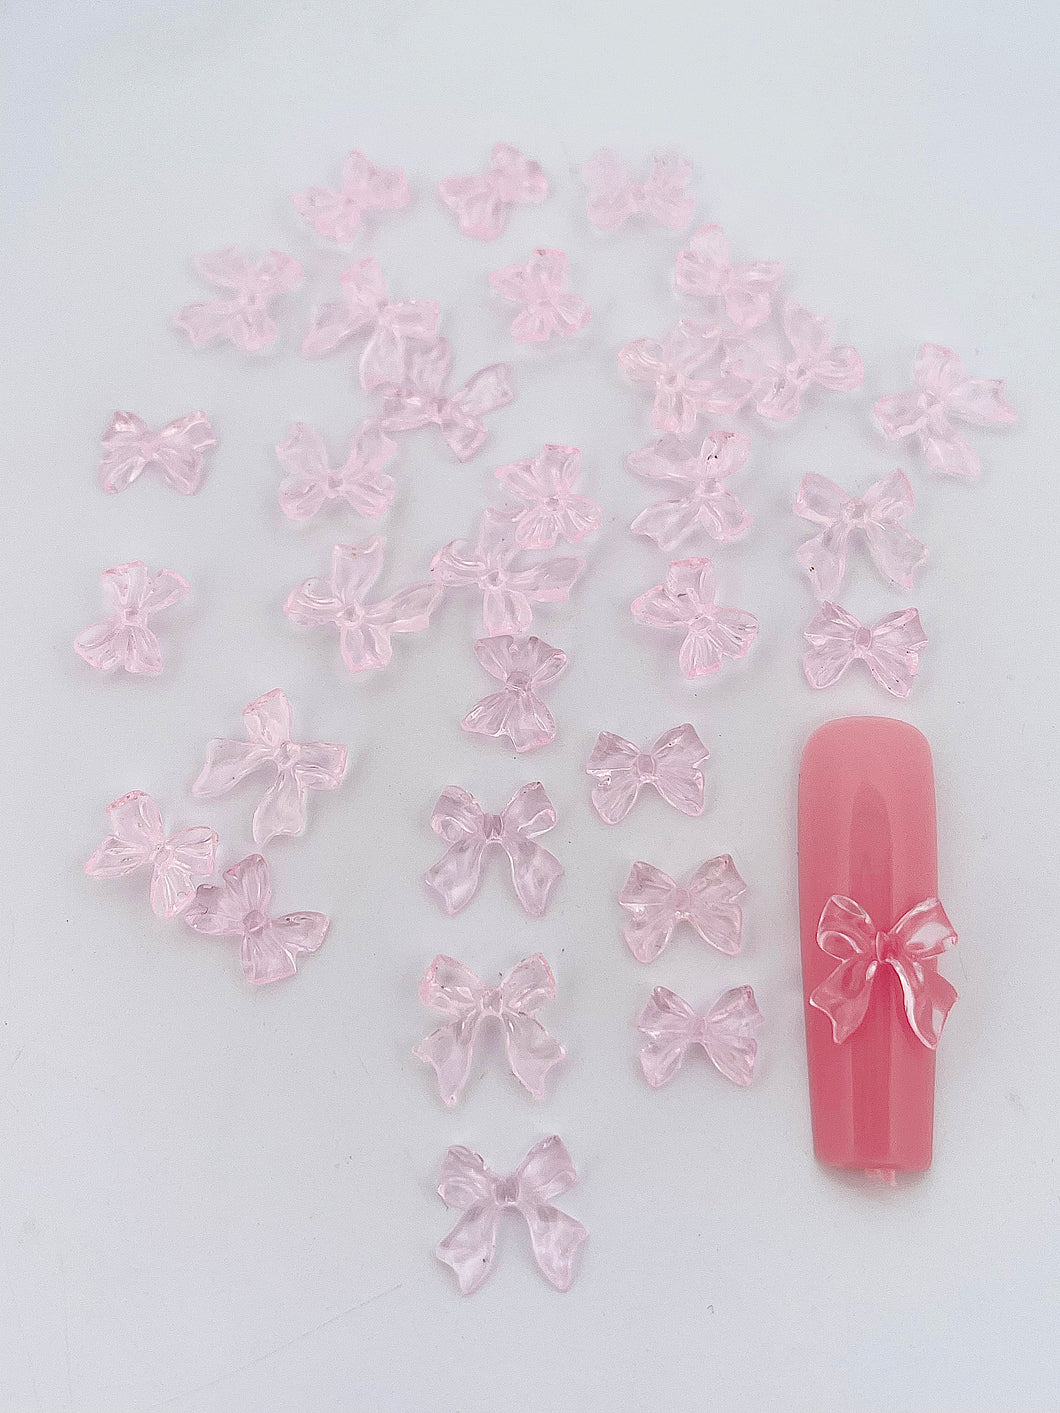 Transparent Pink Resin Nail Bow Charms-30 pieces